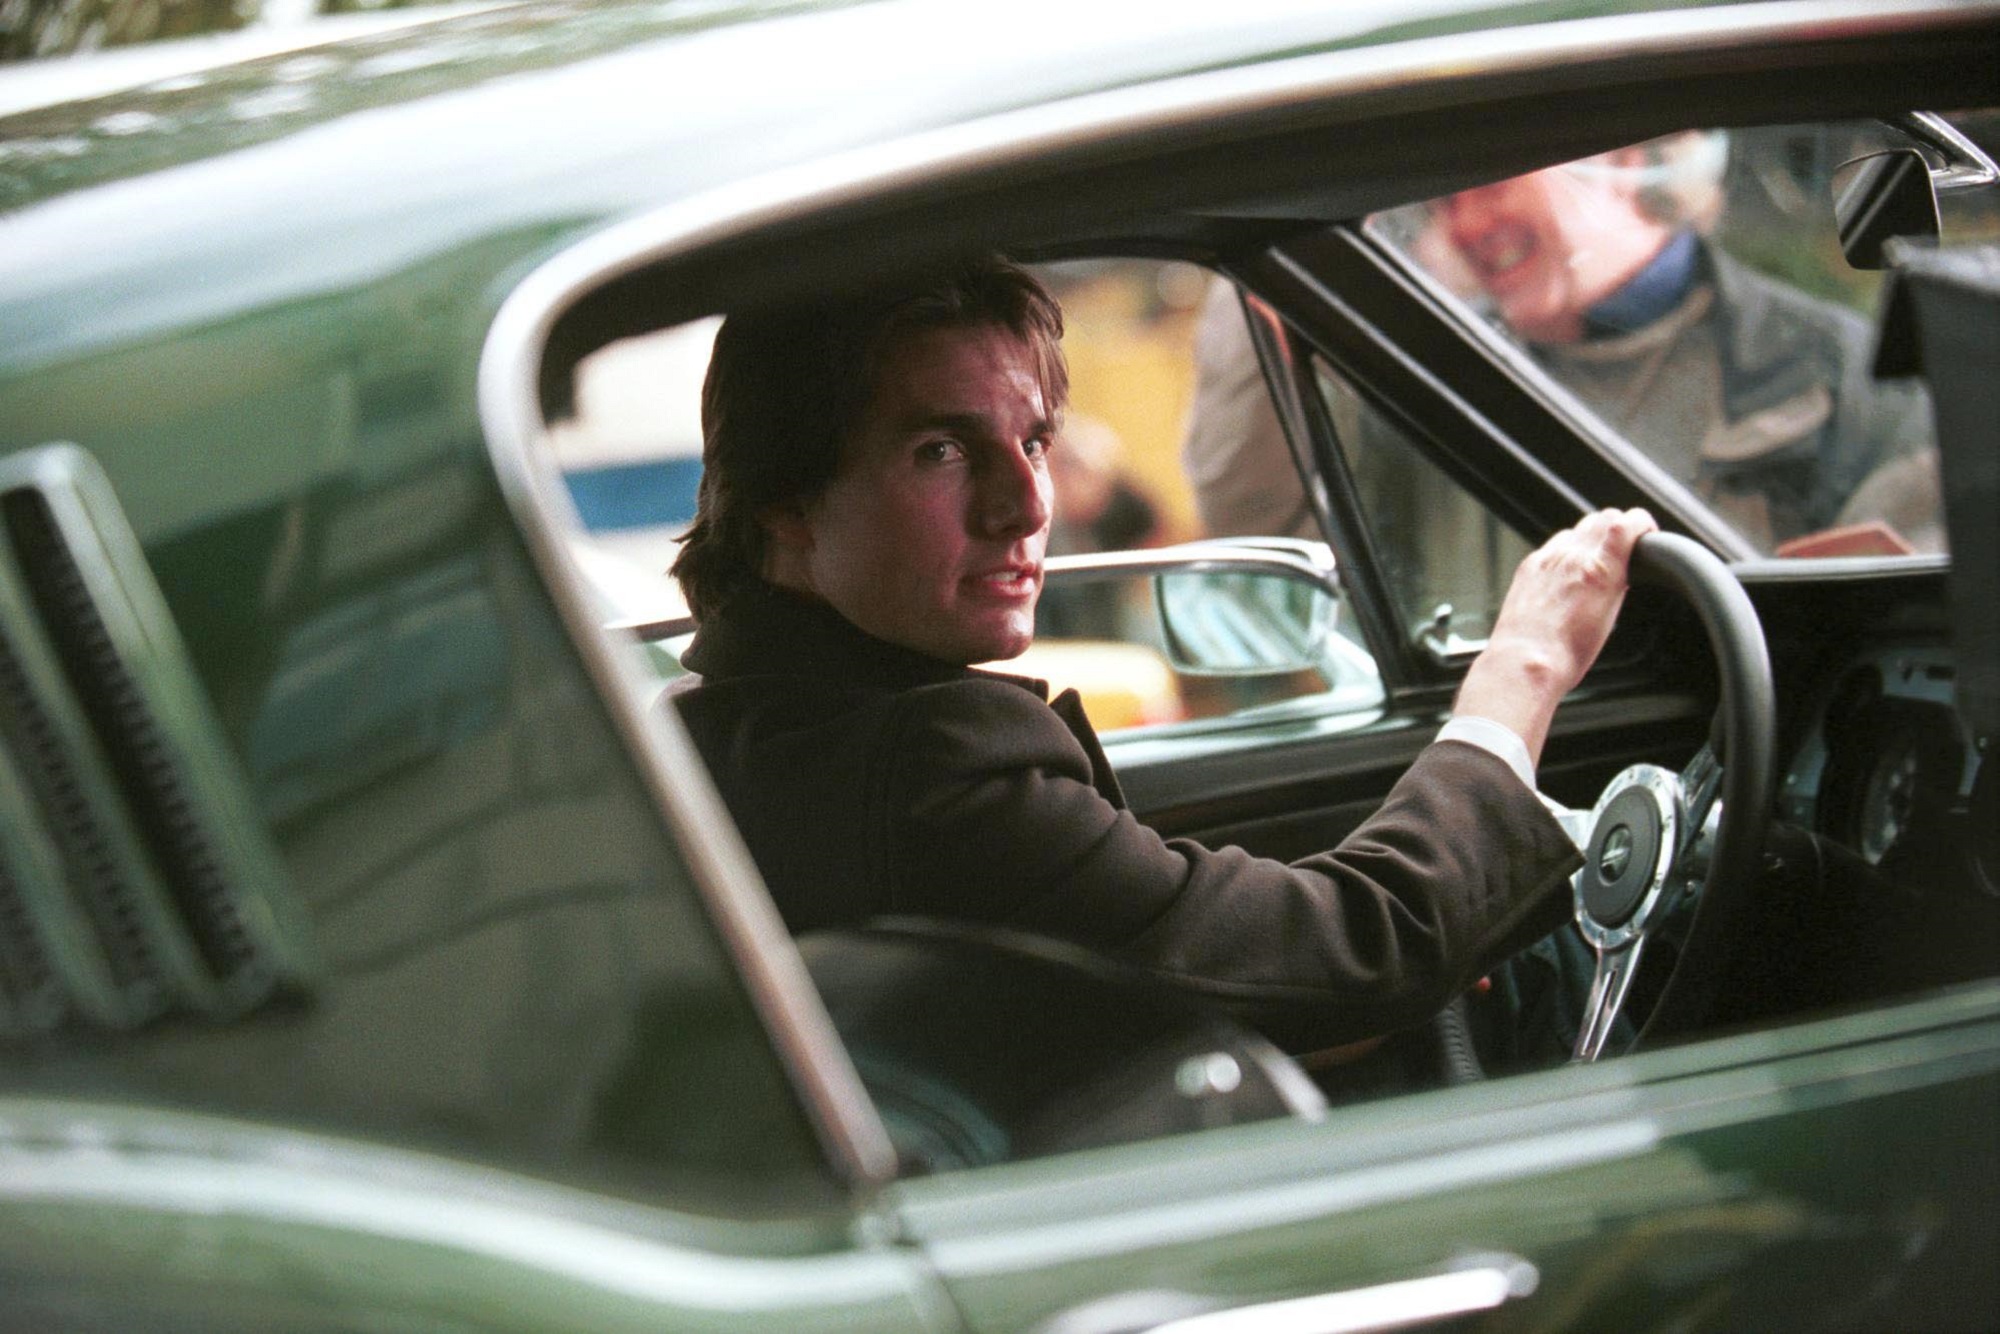 Tom Cruise, like Tim Allen and Jay Leno, is one of the celebrities with a Ford Mustang in his garage.